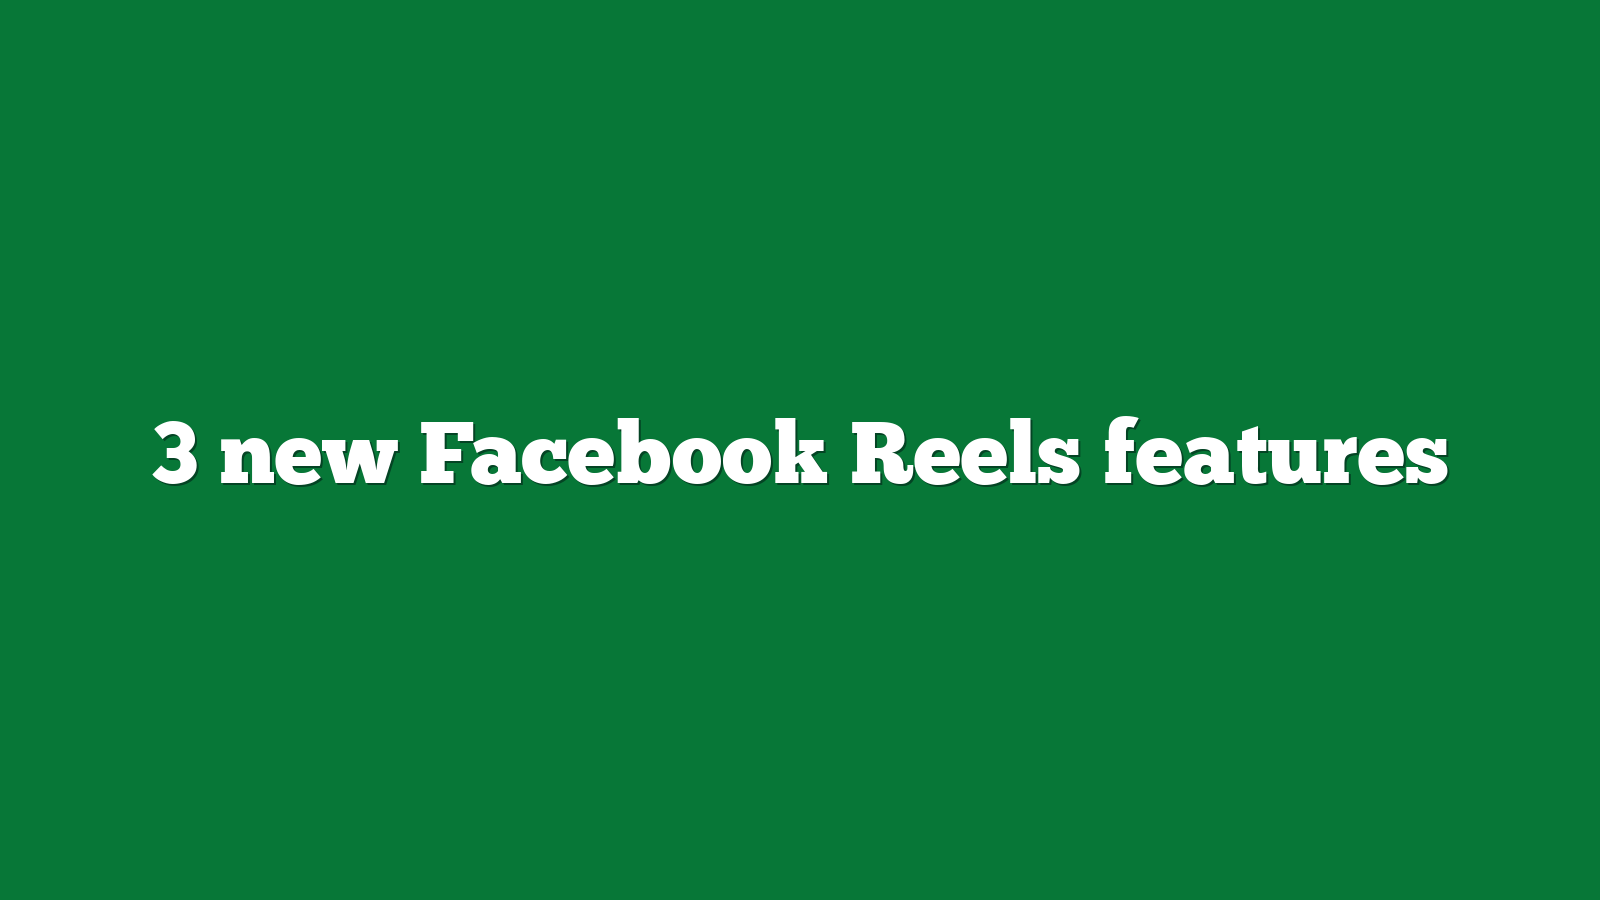 3 new Facebook Reels features